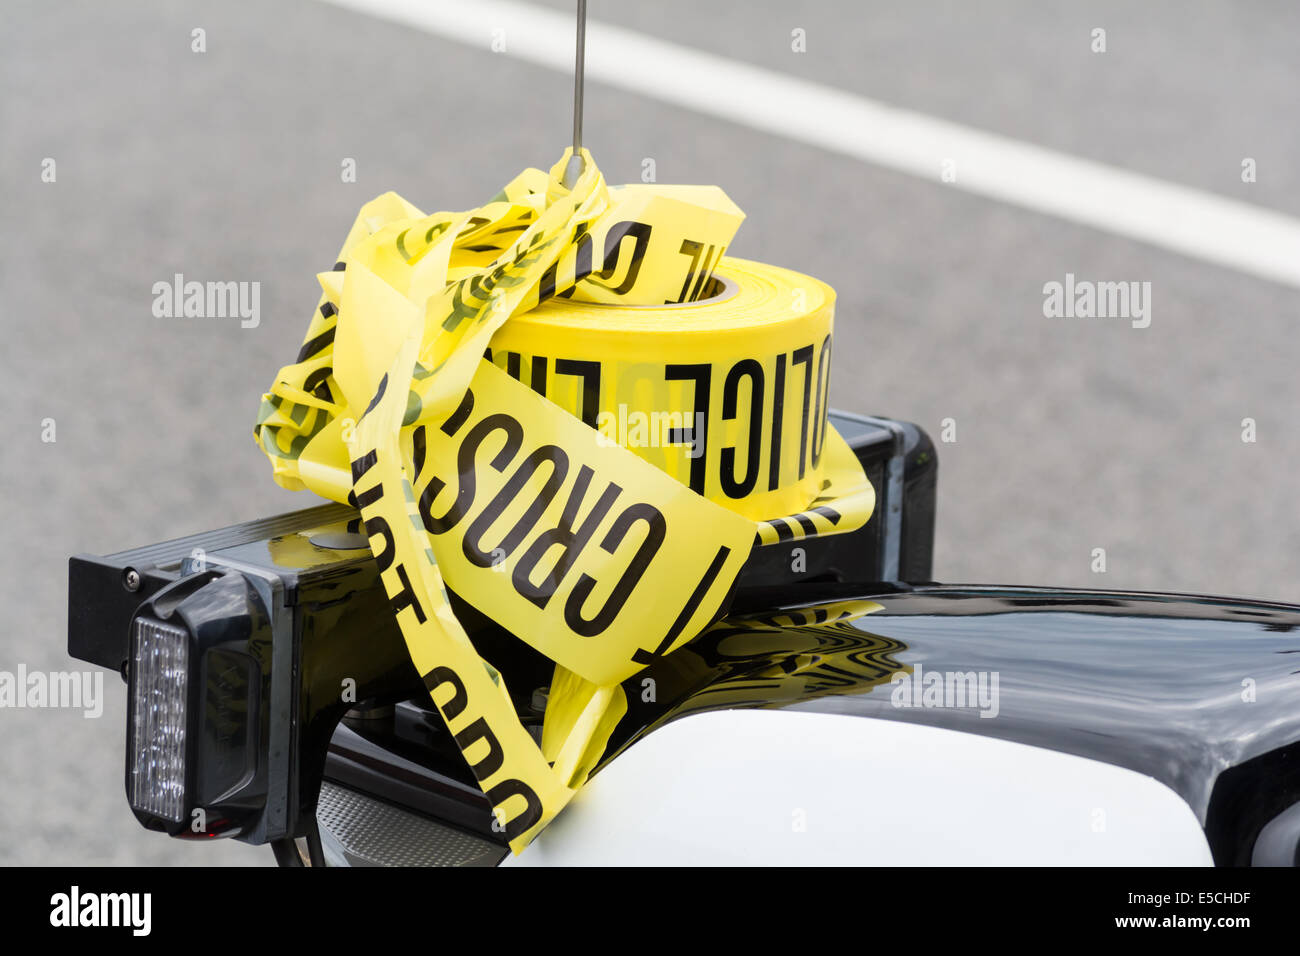 July 19, 2014 - Glendale California, United States. Police caution tape stored on the radio antenna of a police motorcycle. Stock Photo